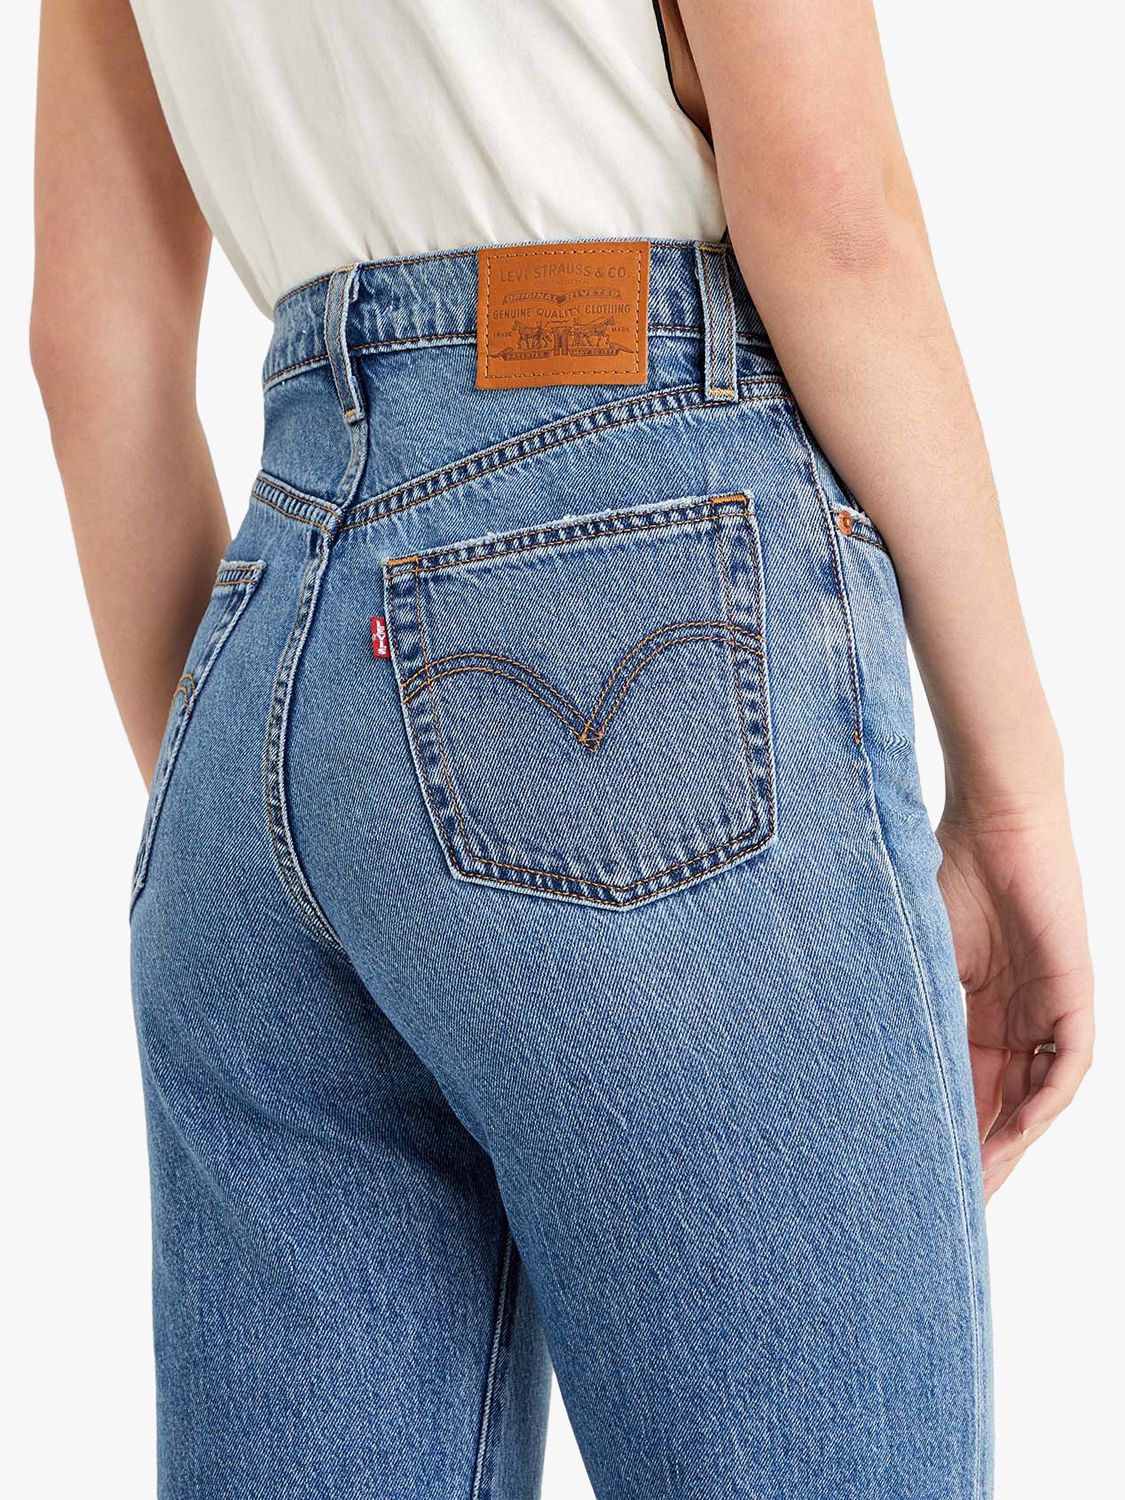 Levi's Ribcage Straight Ankle Jeans, At The Ready